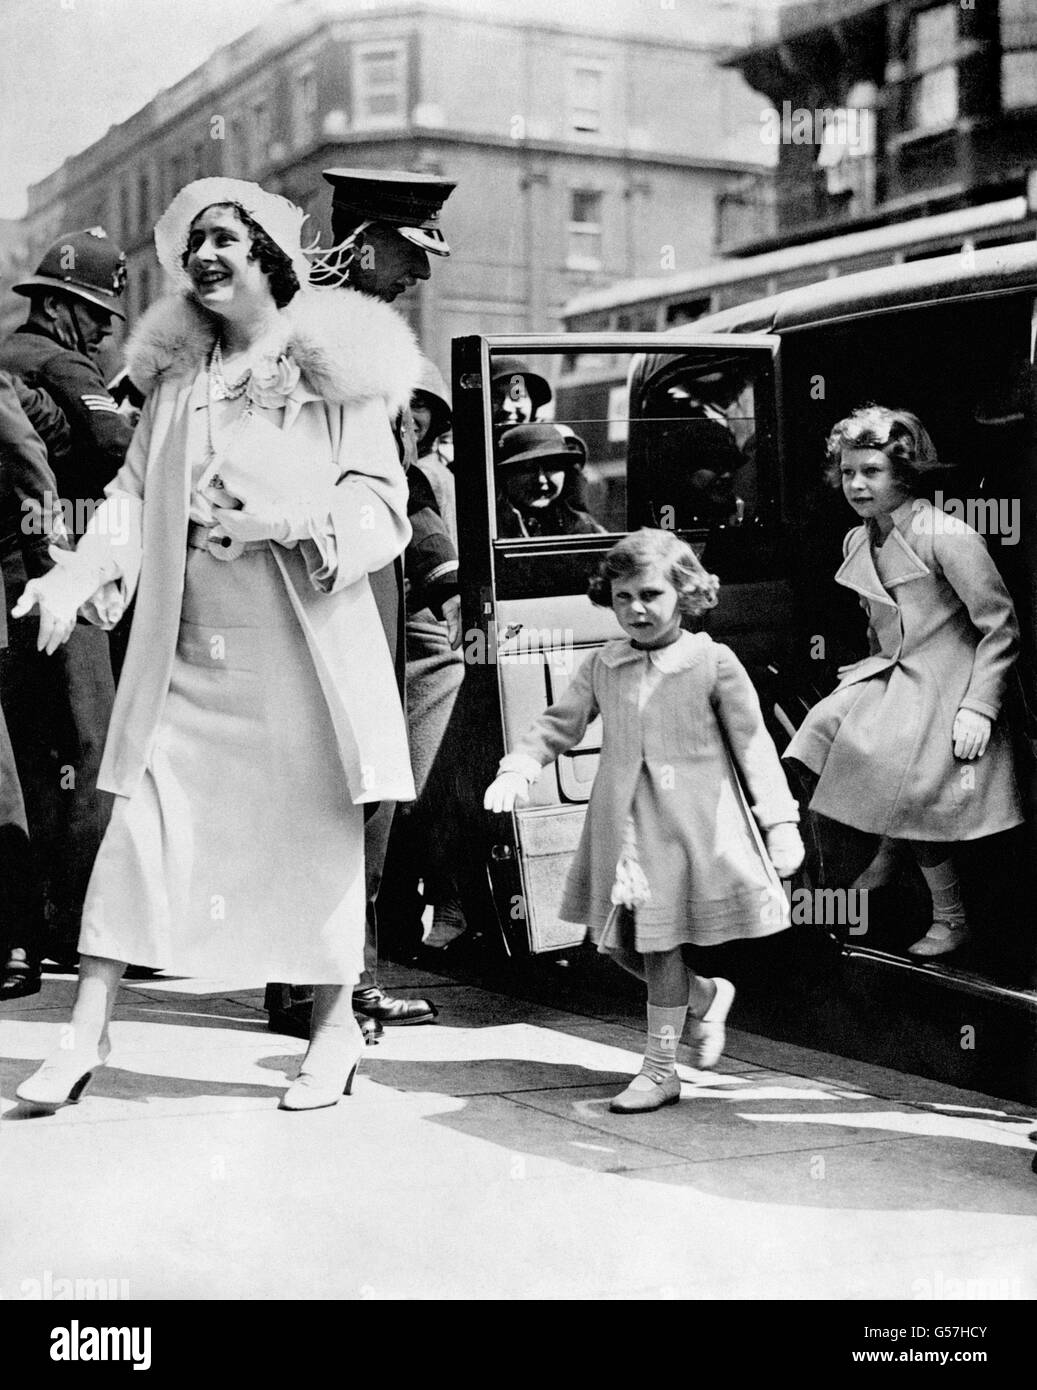 The Duchess of York (later Queen Elizabeth and the Queen Mother) arrives by car at the Royal Tournament in London accompanied by her daughters, Princess Elizabeth (r) and Princess Margaret. Stock Photo